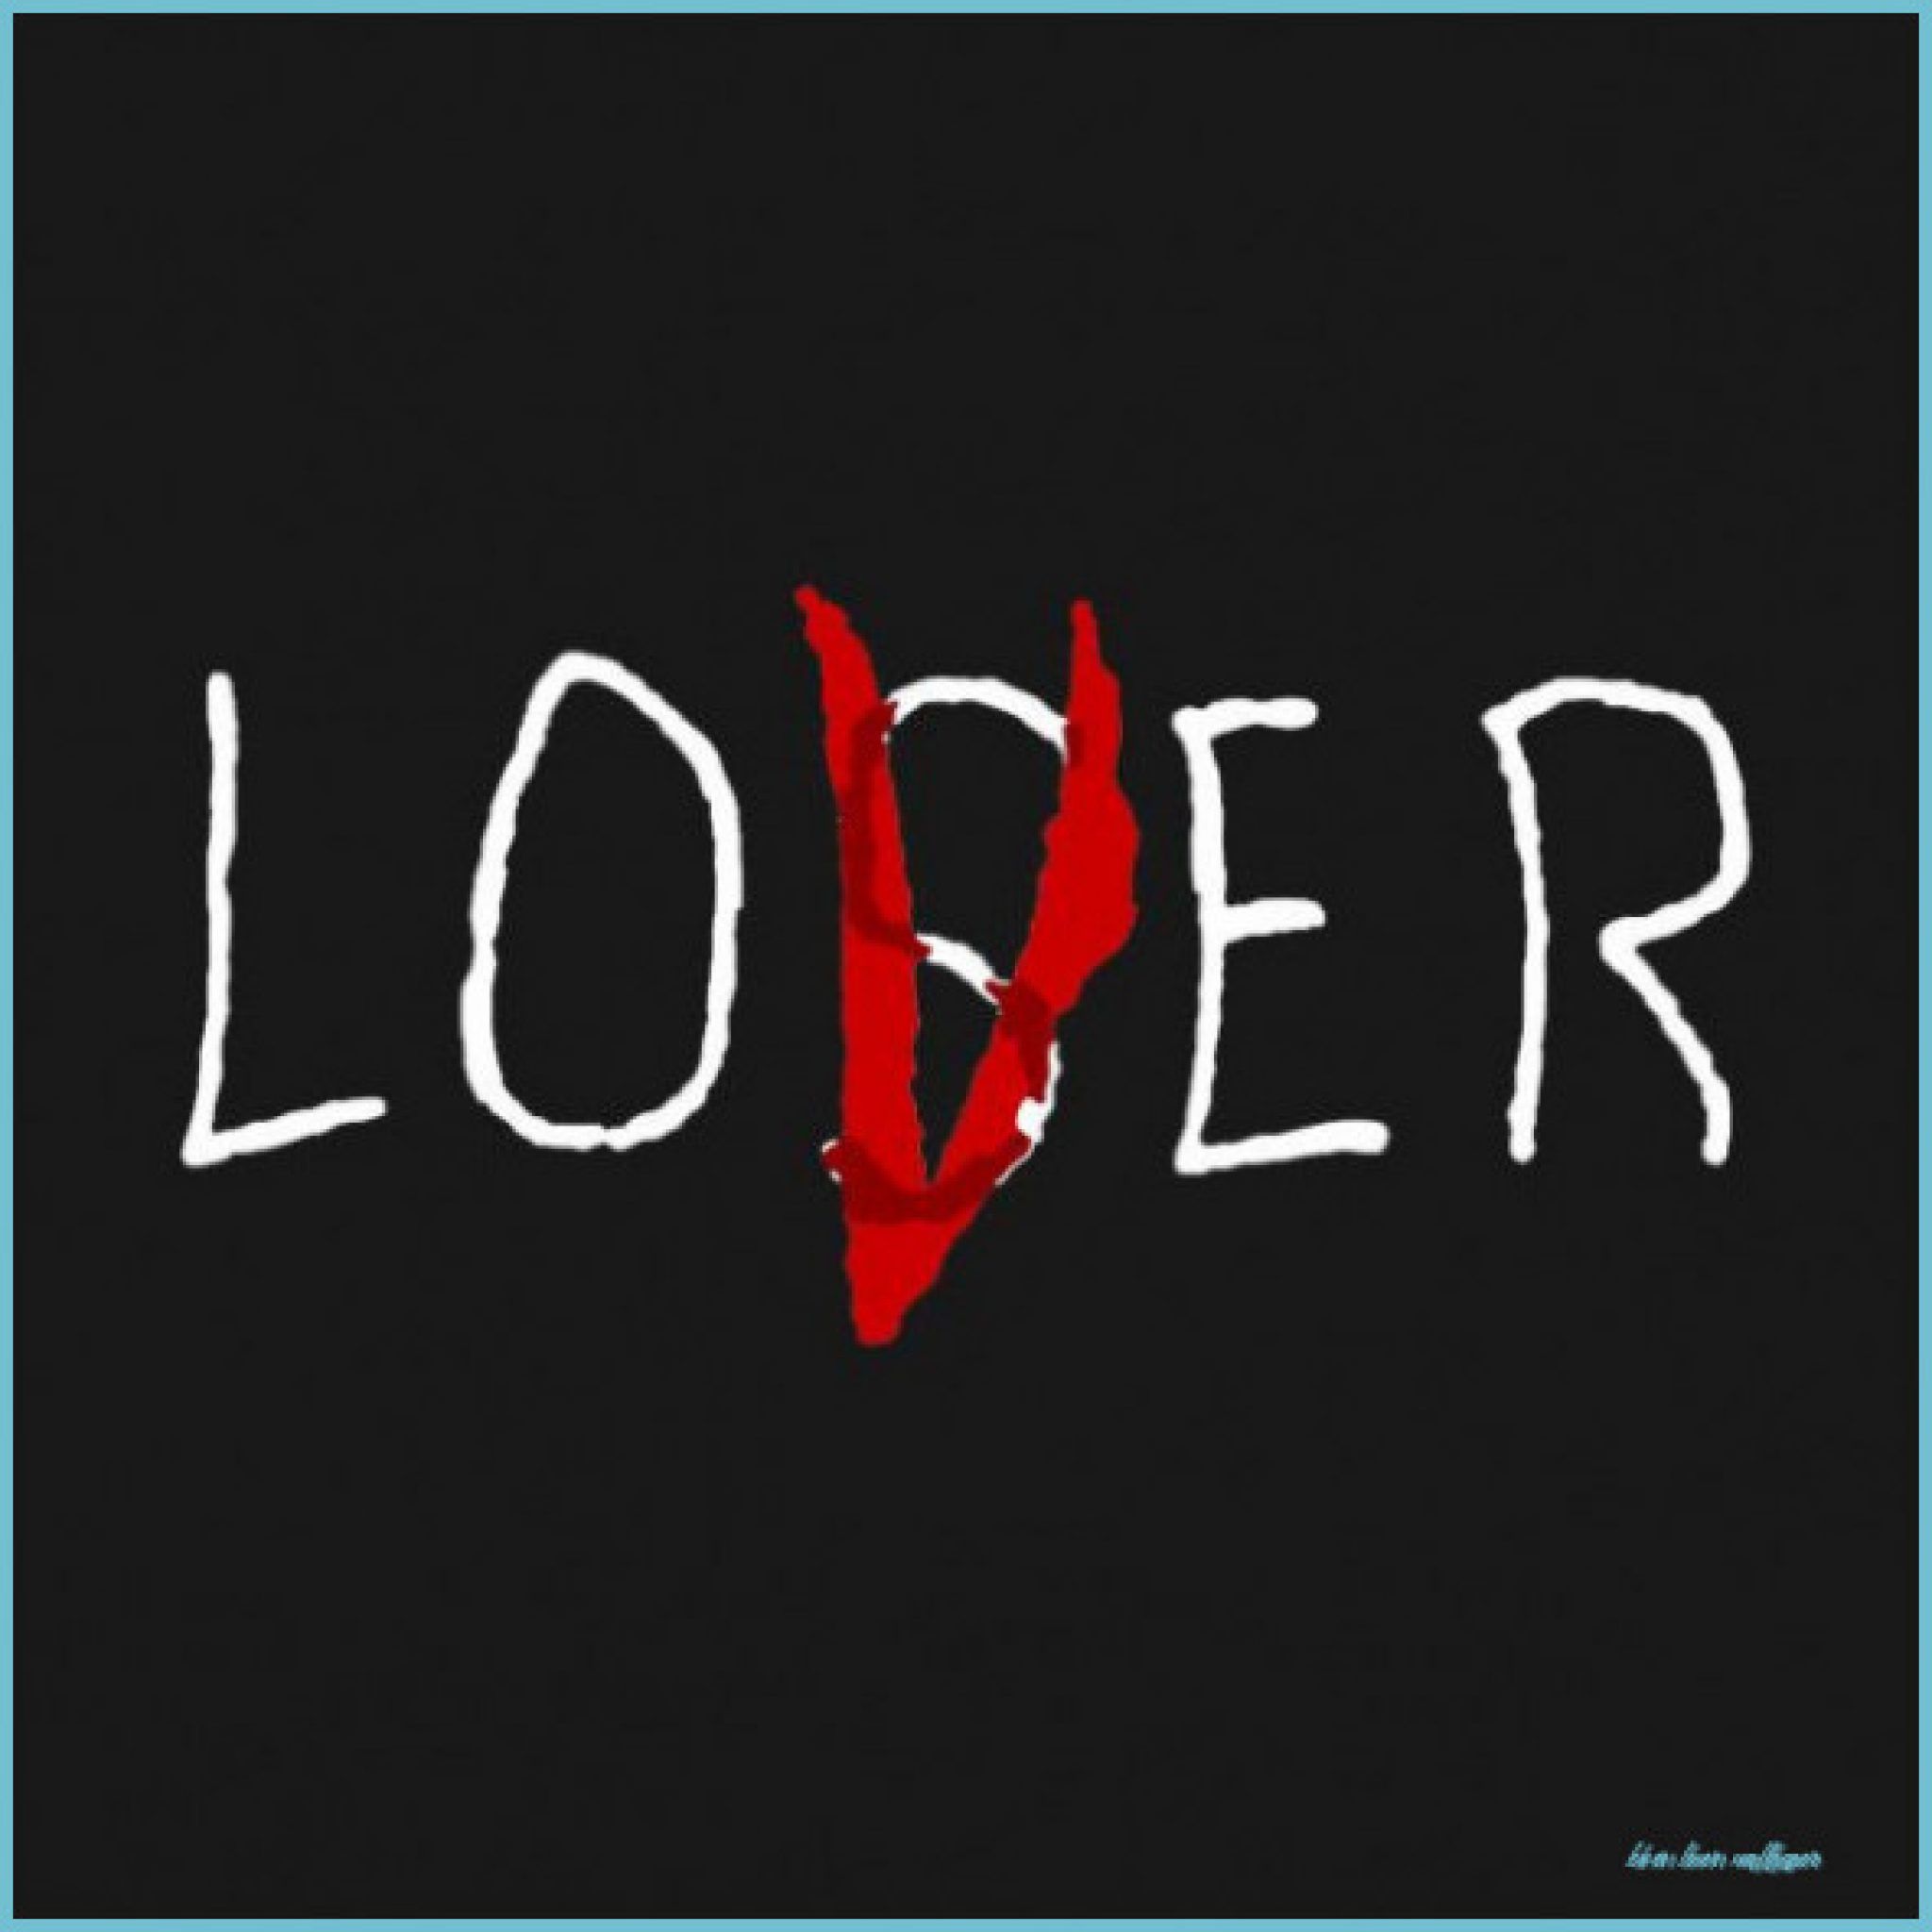 Check Out This Awesome 'Loser Lover' Design